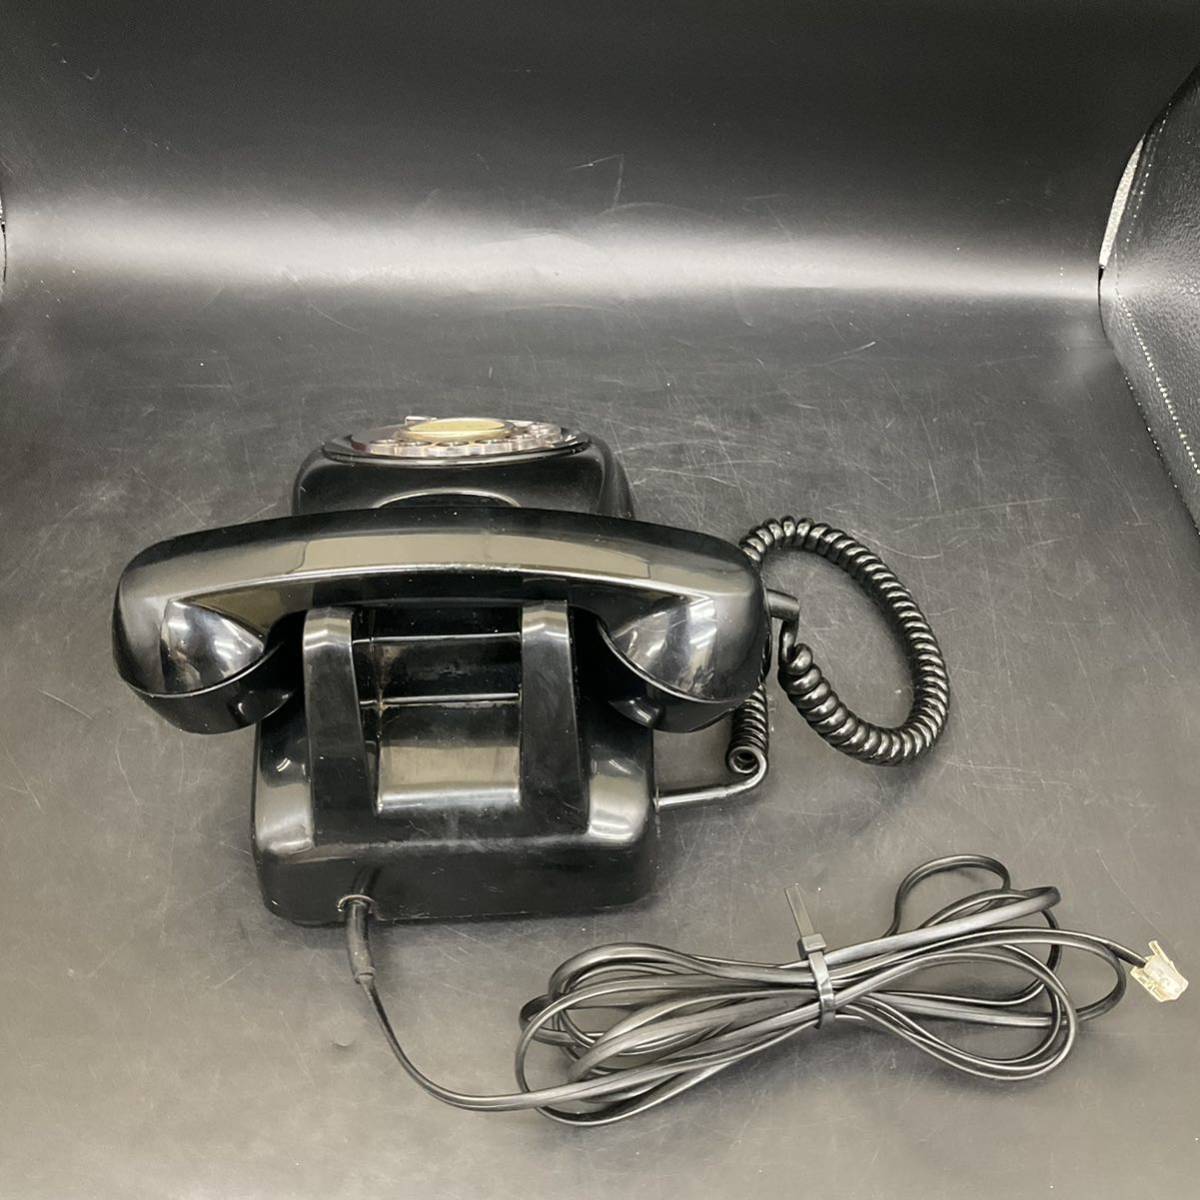 T12091535 antique black telephone dial type 600-A2 * telephone . reception is possible to do . telephone call is un- possible. 